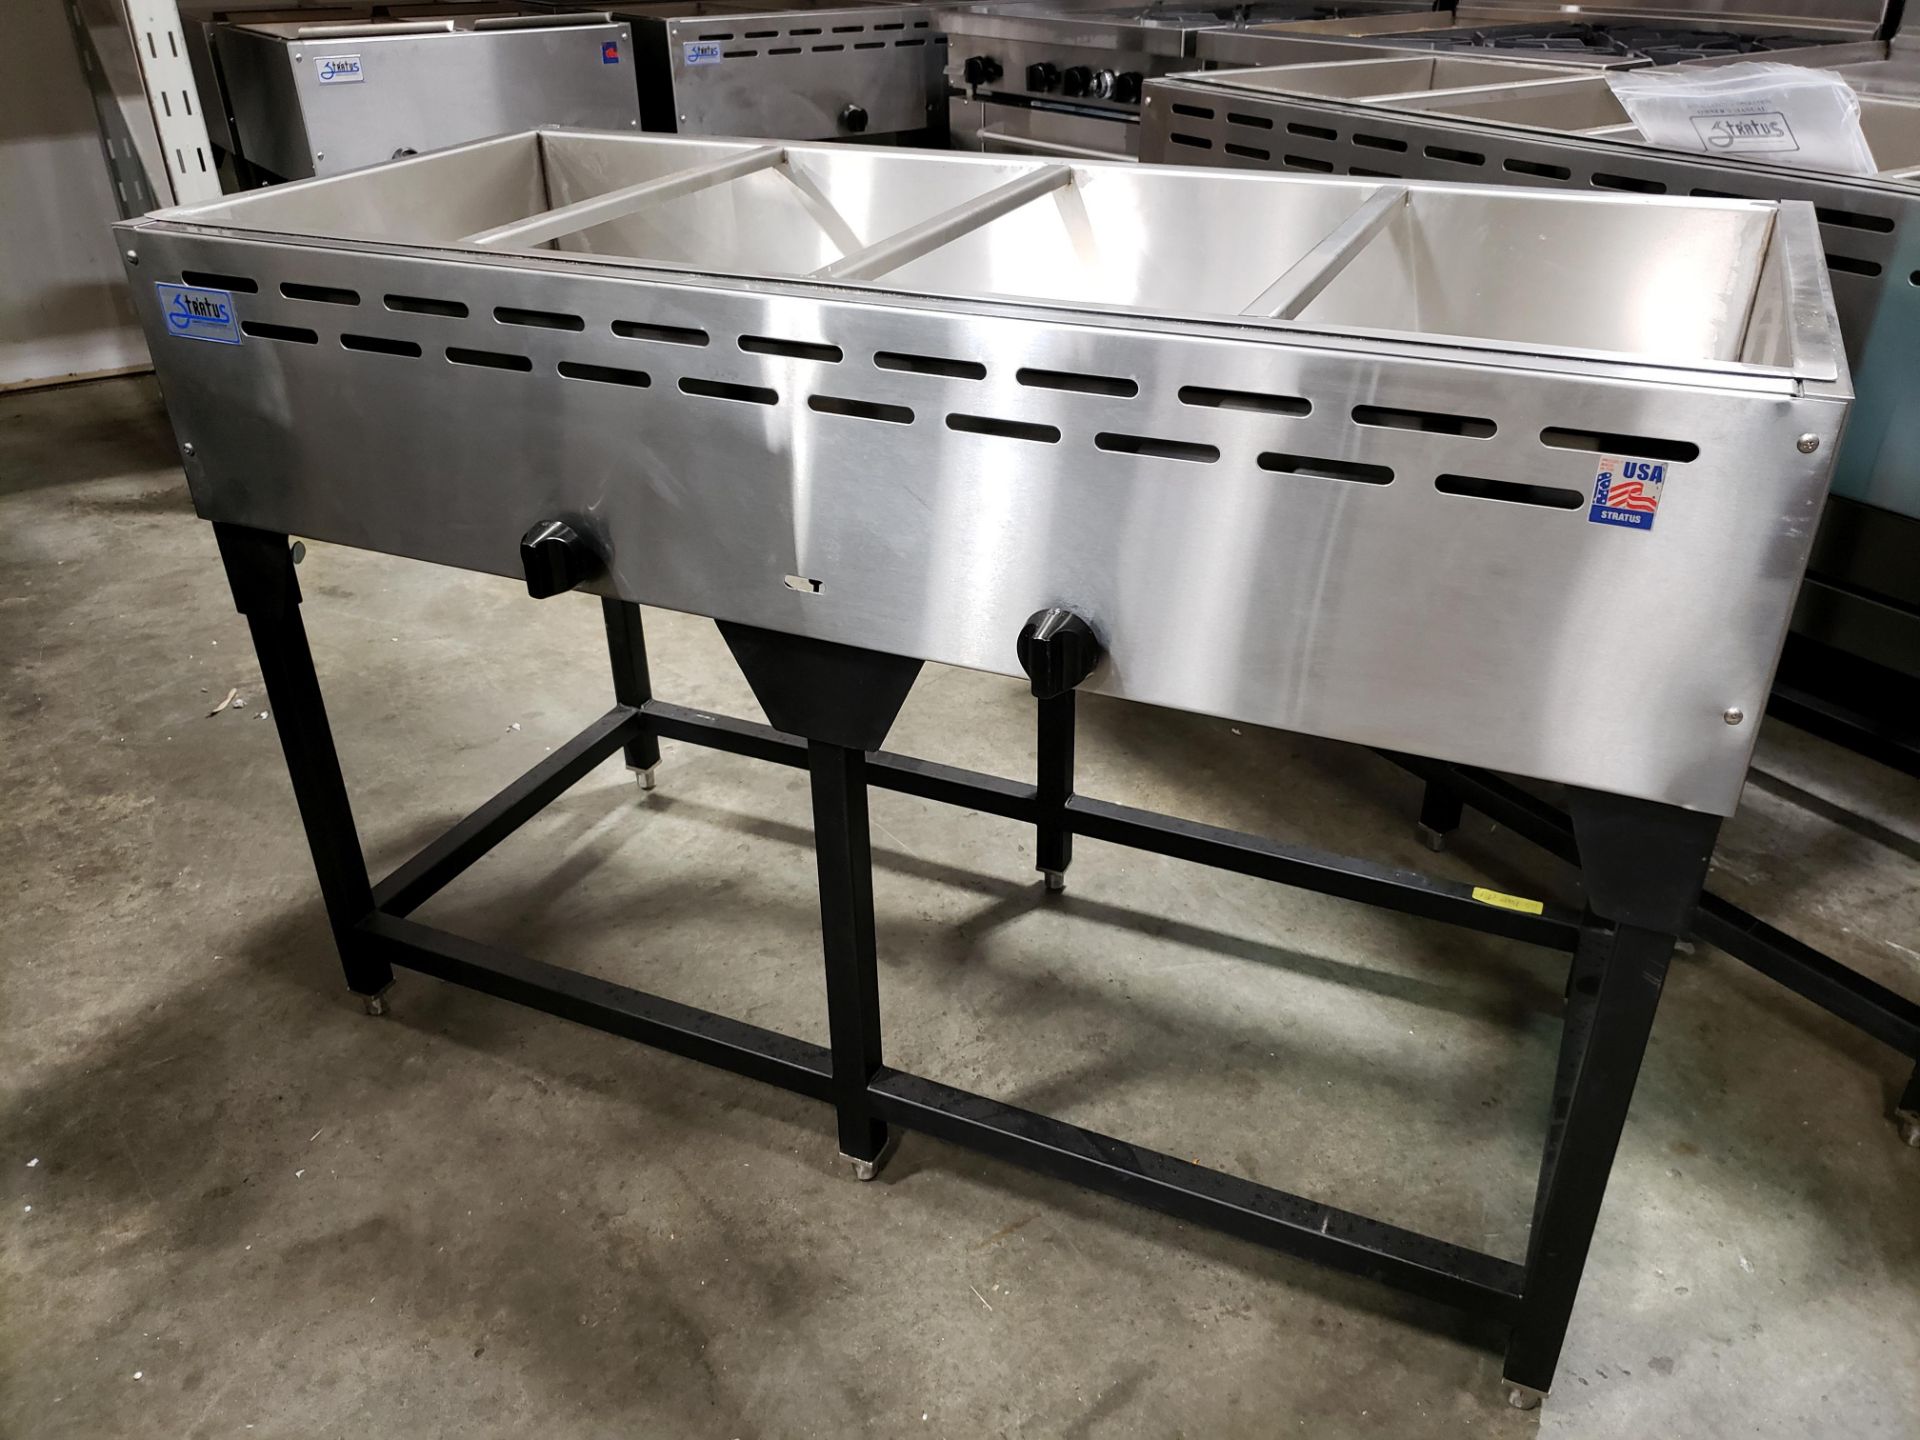 54" Propane 4 Well Steam Table on Base - Model SST-54-4-S - CSA Certified - Made in USA